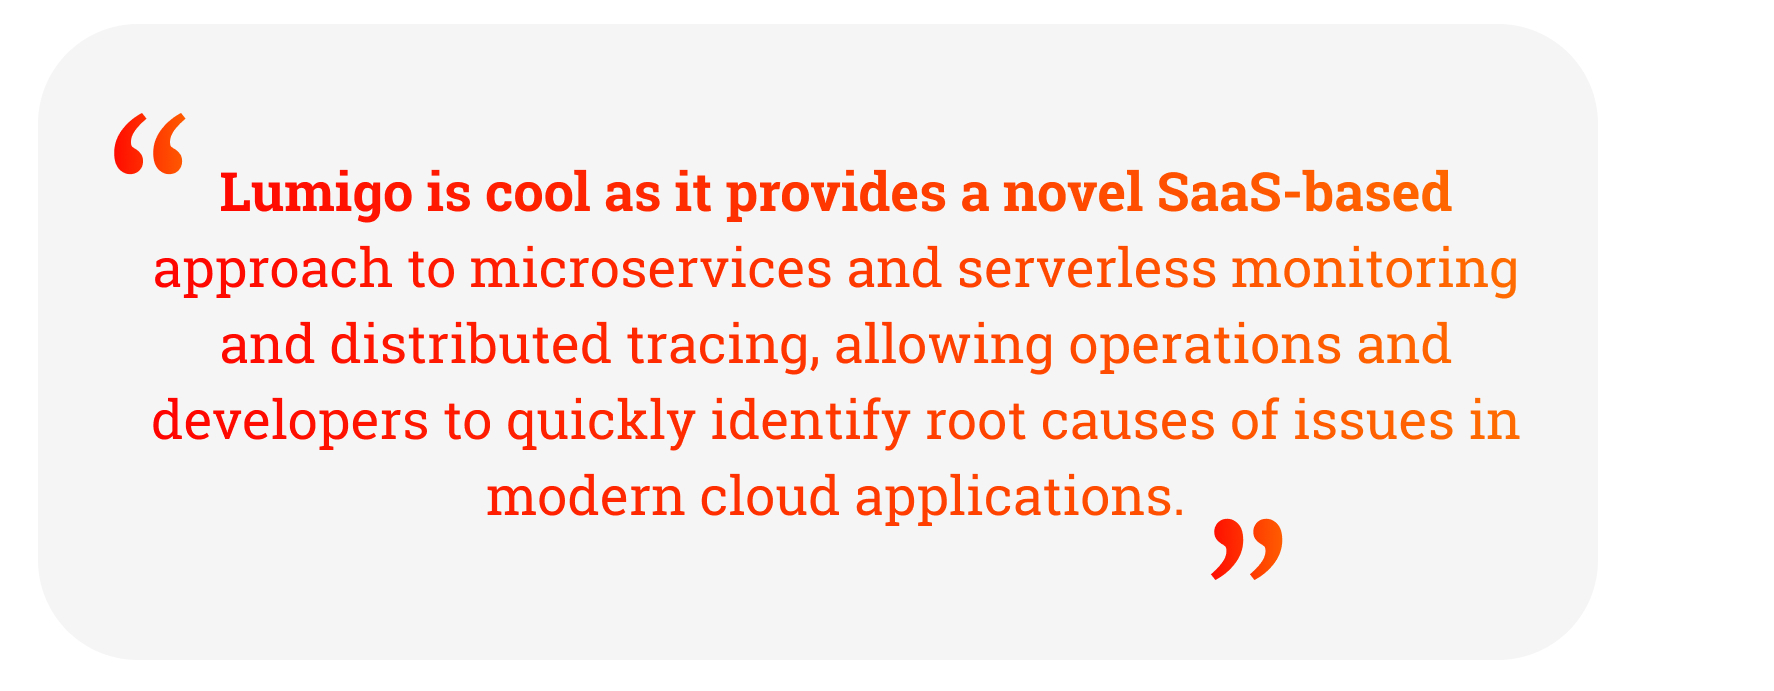 Quote: Lumigo is cool as it provides a novel SaaS-based approach to microservices and serverless monitoring and distributed tracing, allowing operations and developers to quickly identify root causes of issues in modern cloud applications.